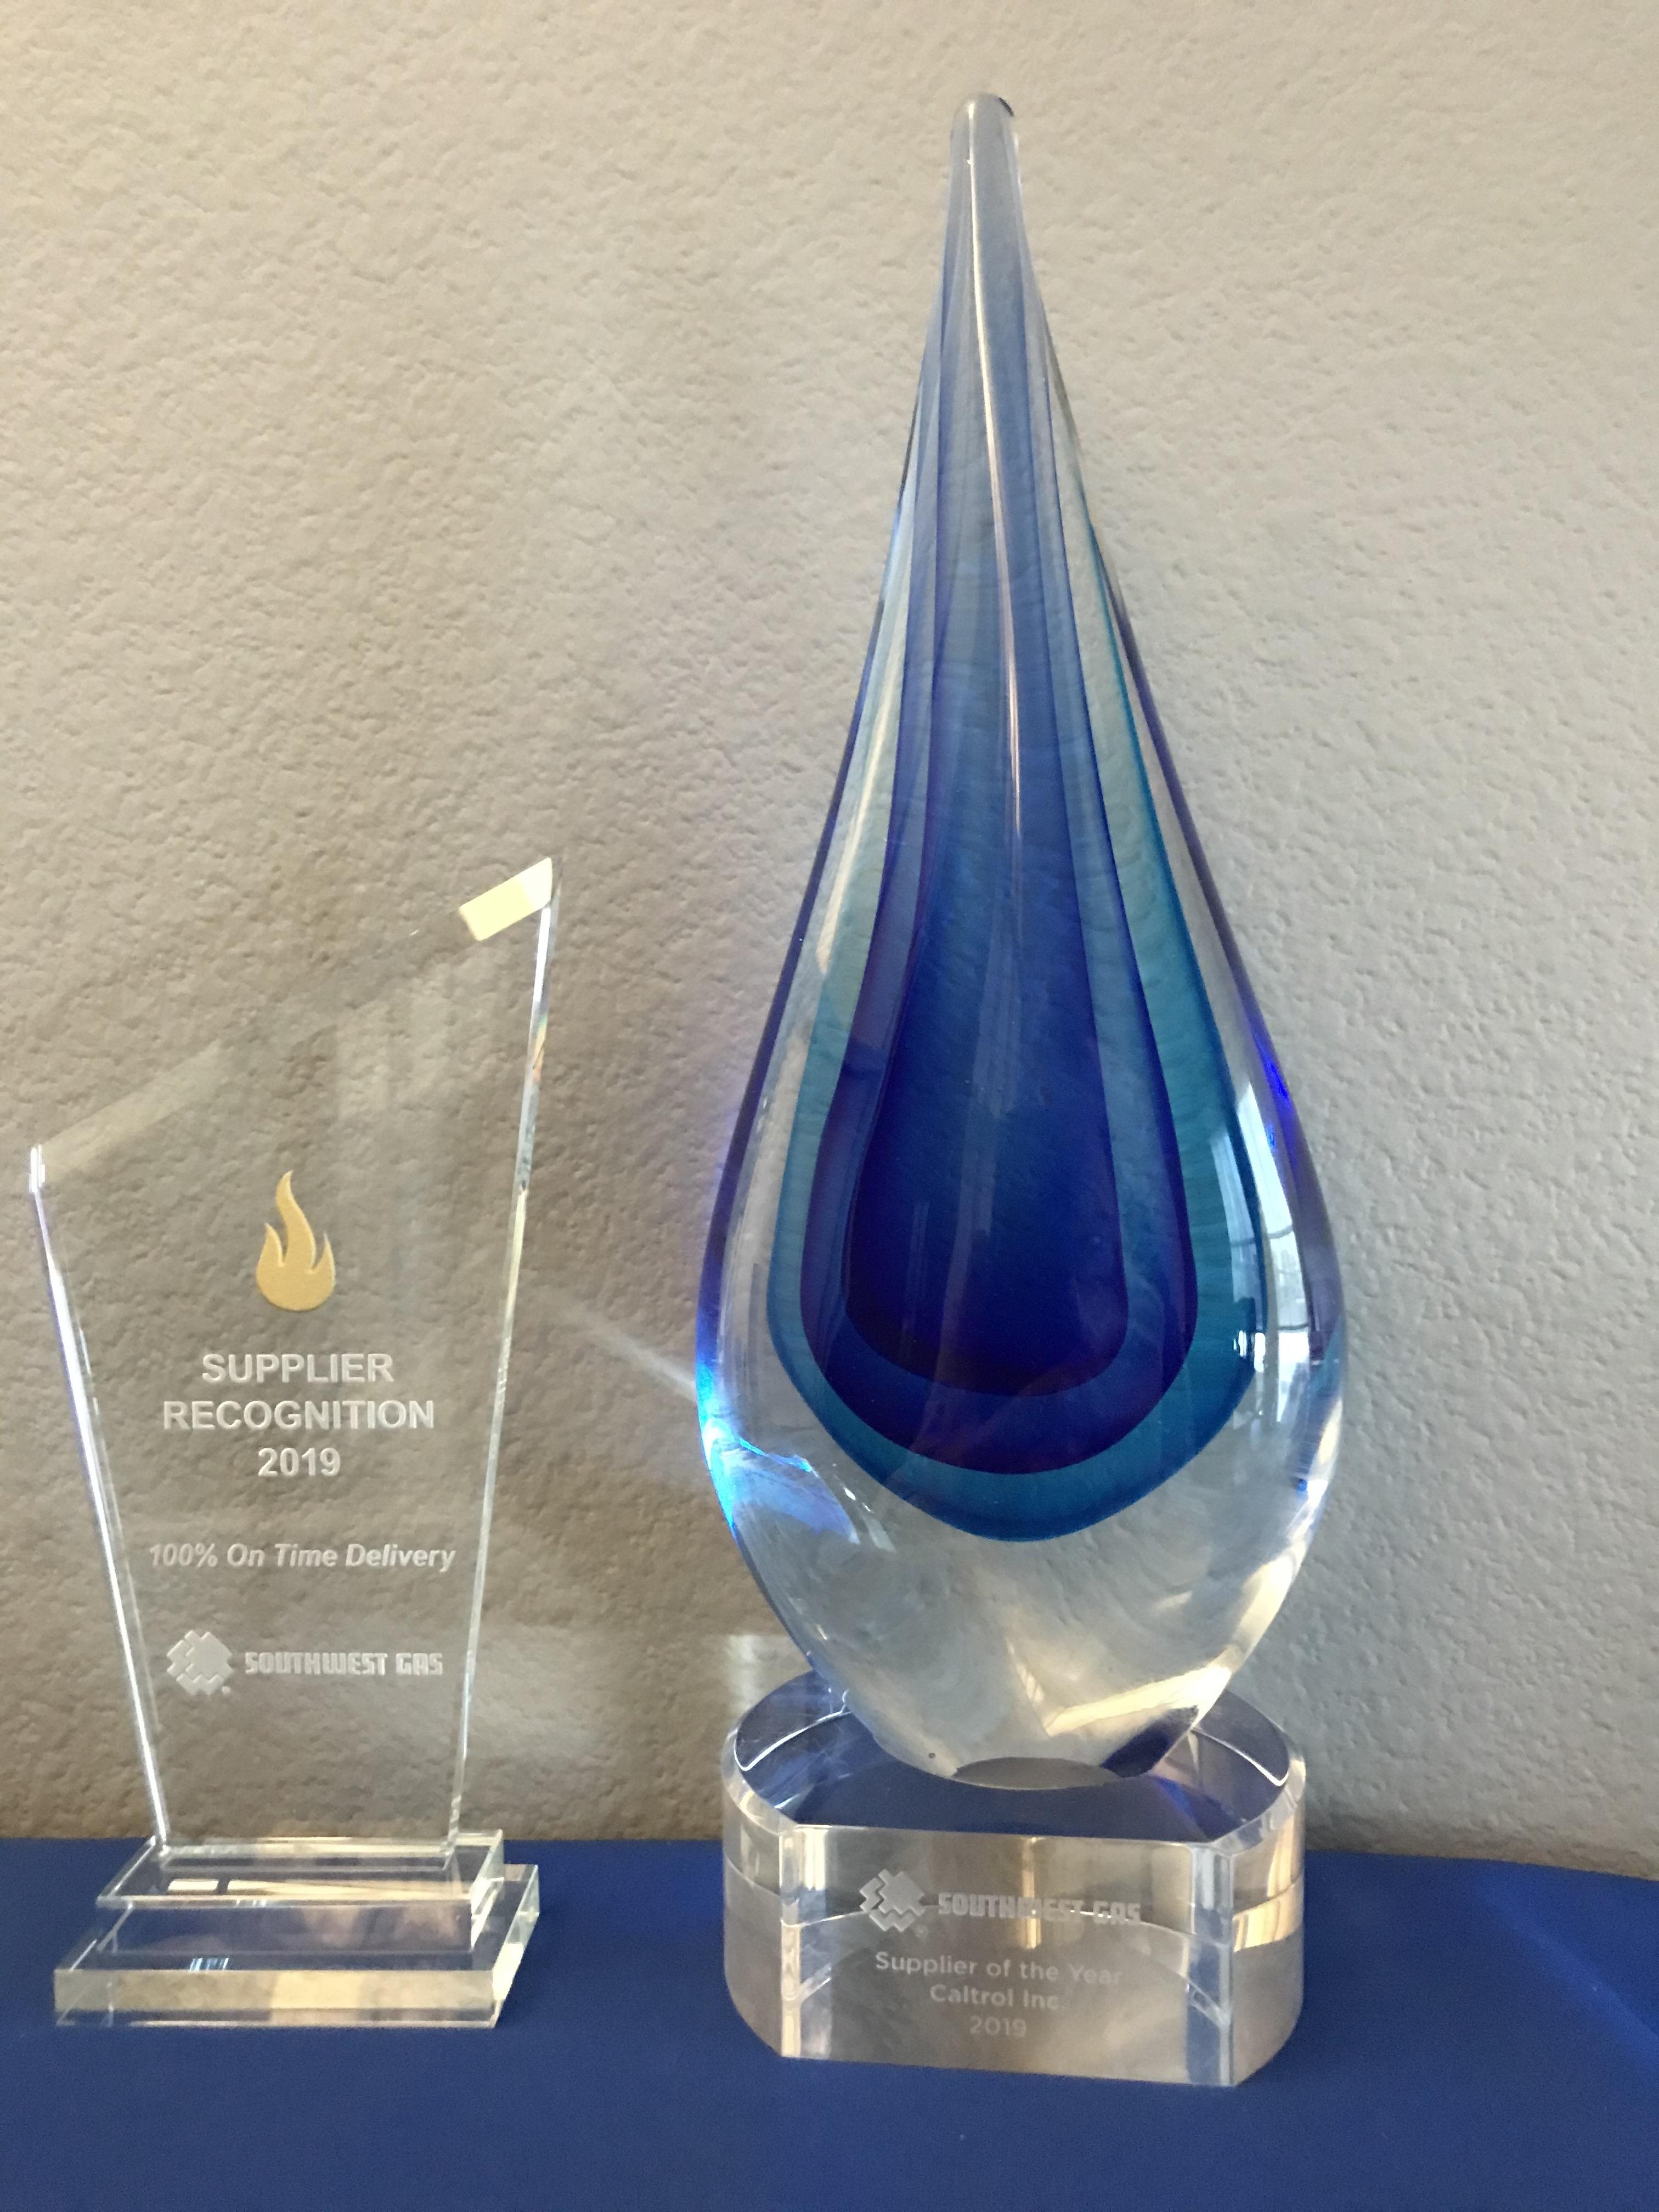 Southwest Gas names Caltrol as their supplier of the year!